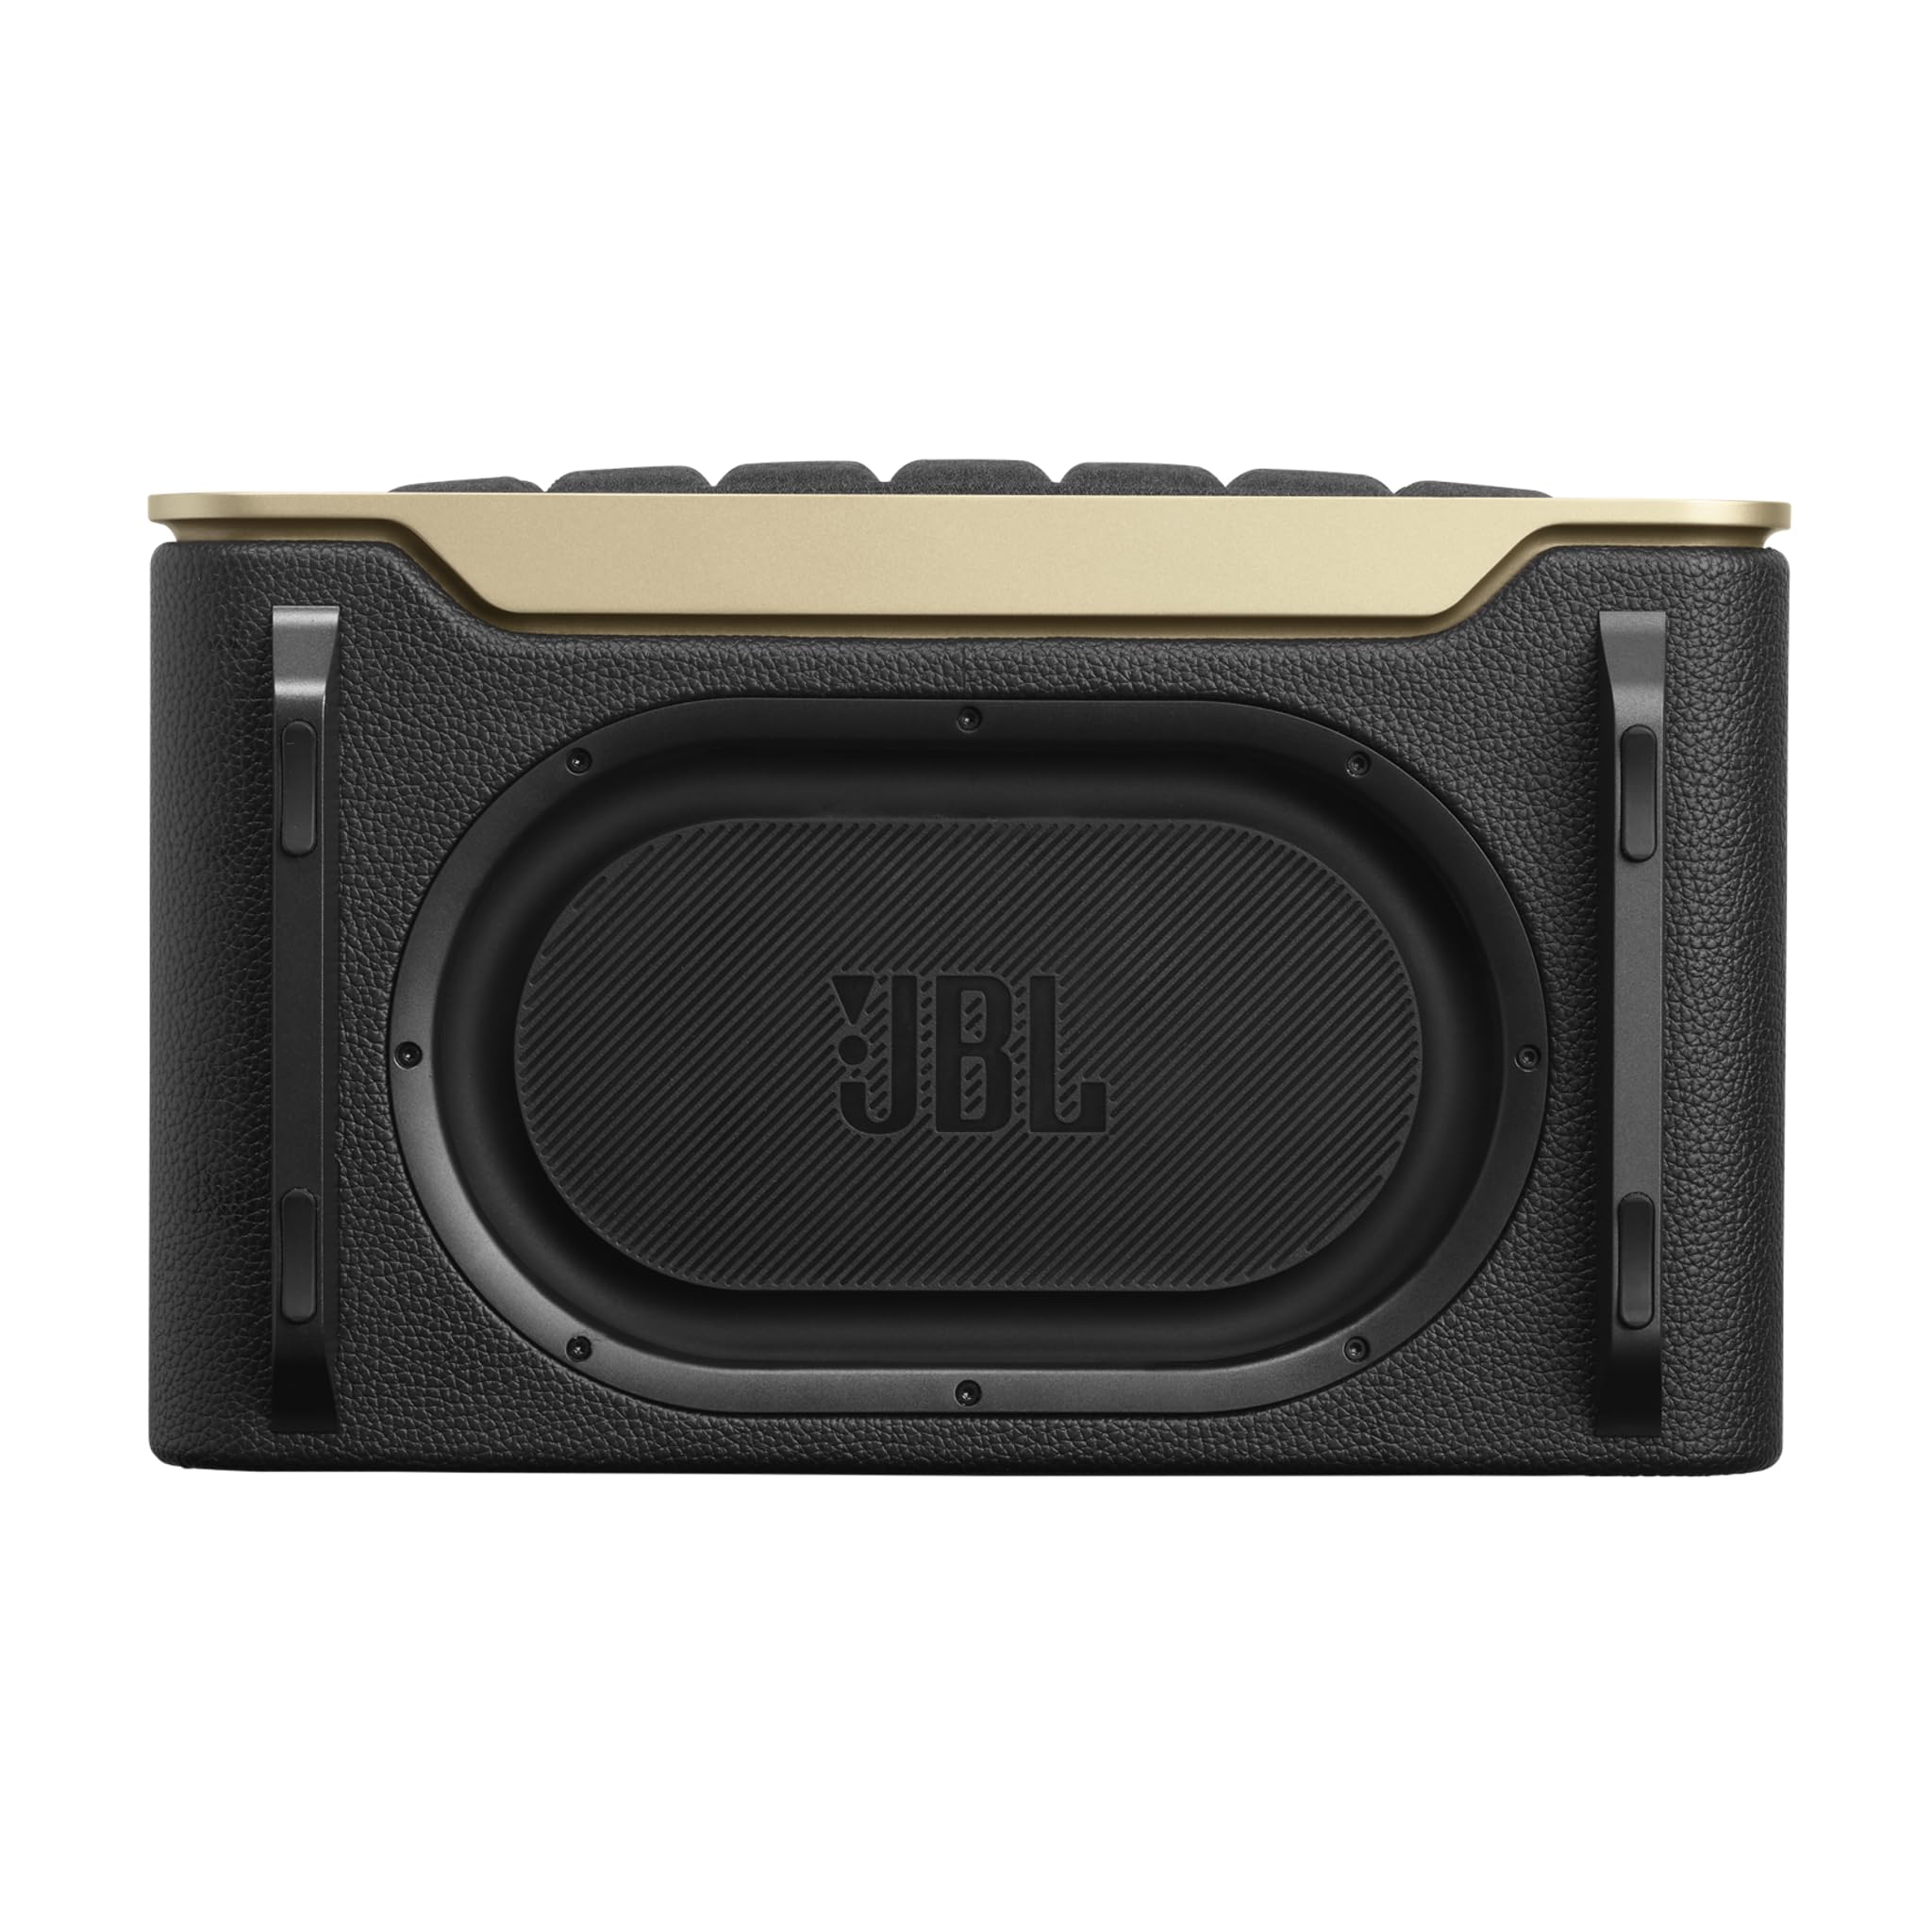 JBL Authentics 200 - Retro Style Smart Home Speaker with Built in Wi-Fi, Bluetooth and Voice Assistants, Alexa and Google Assistant, Multi-Room Playback, Automatic self tuning